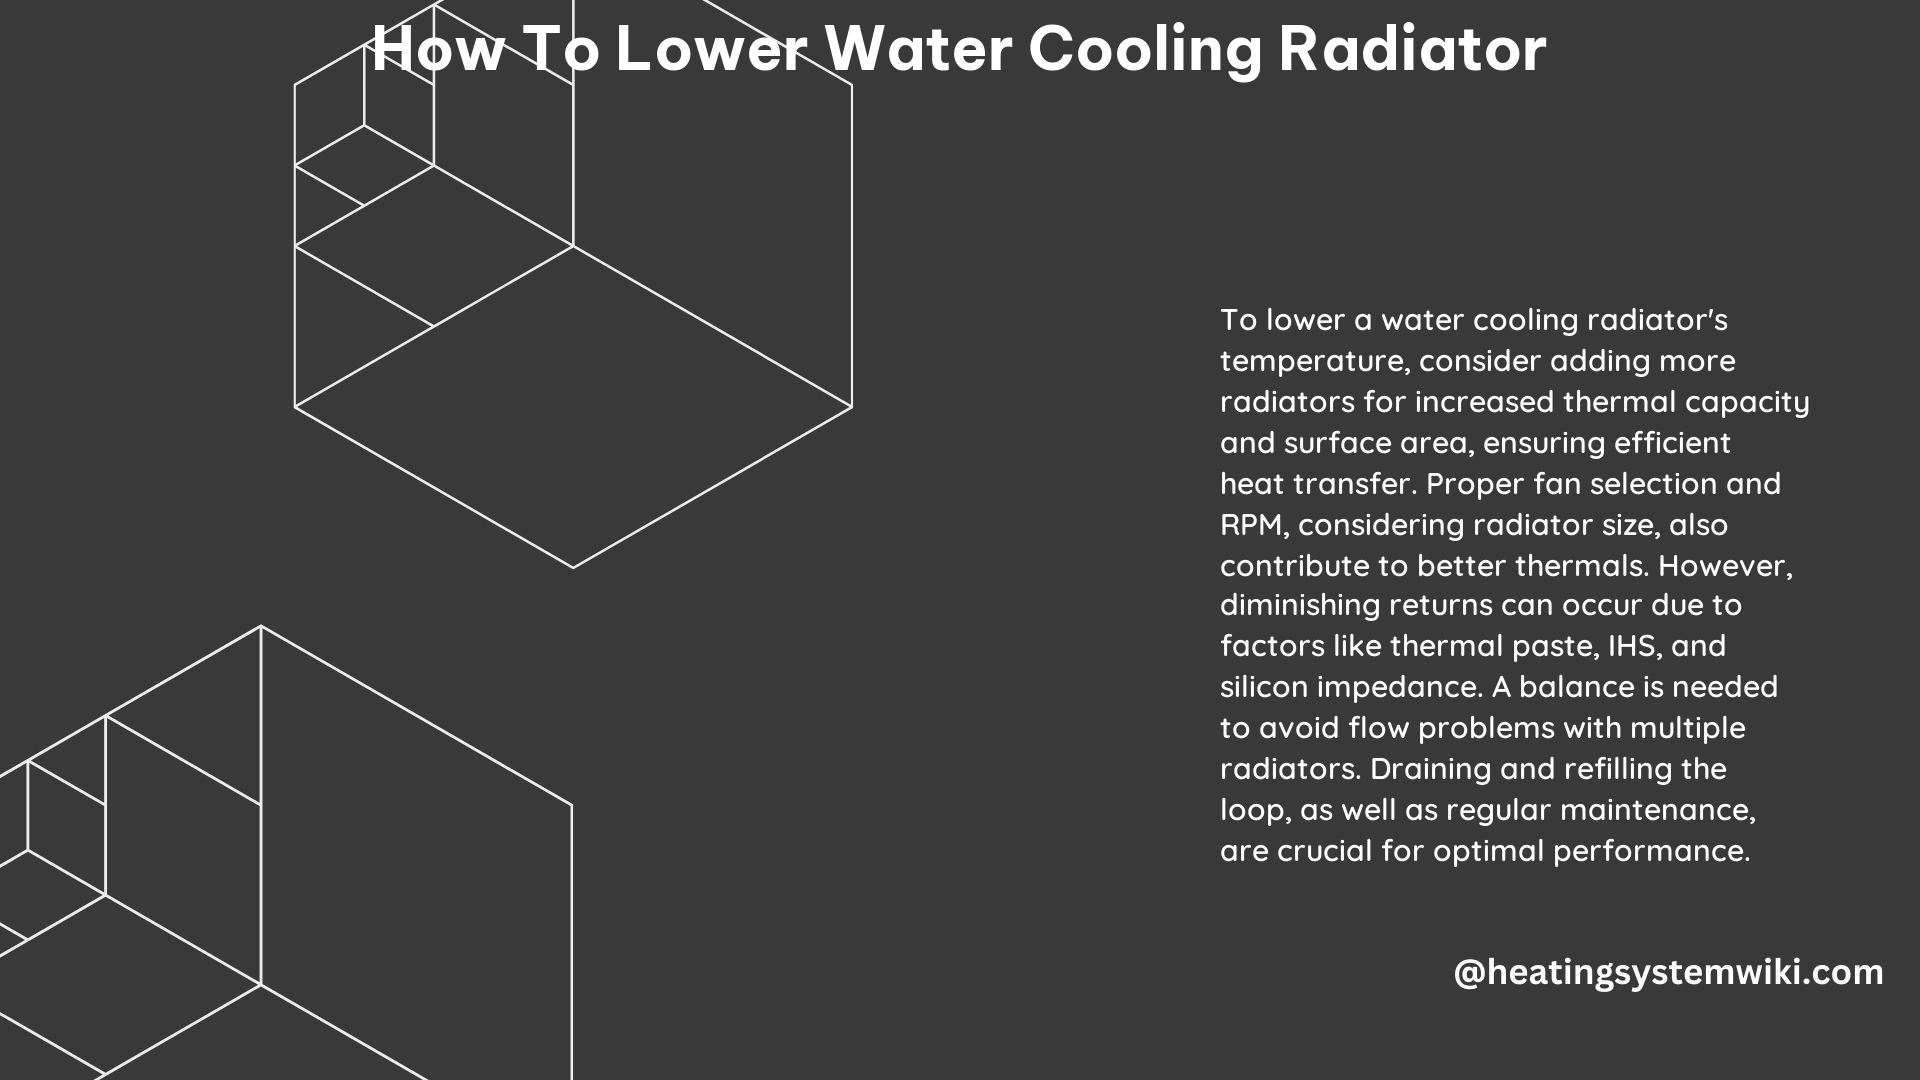 How to Lower Water Cooling Radiator